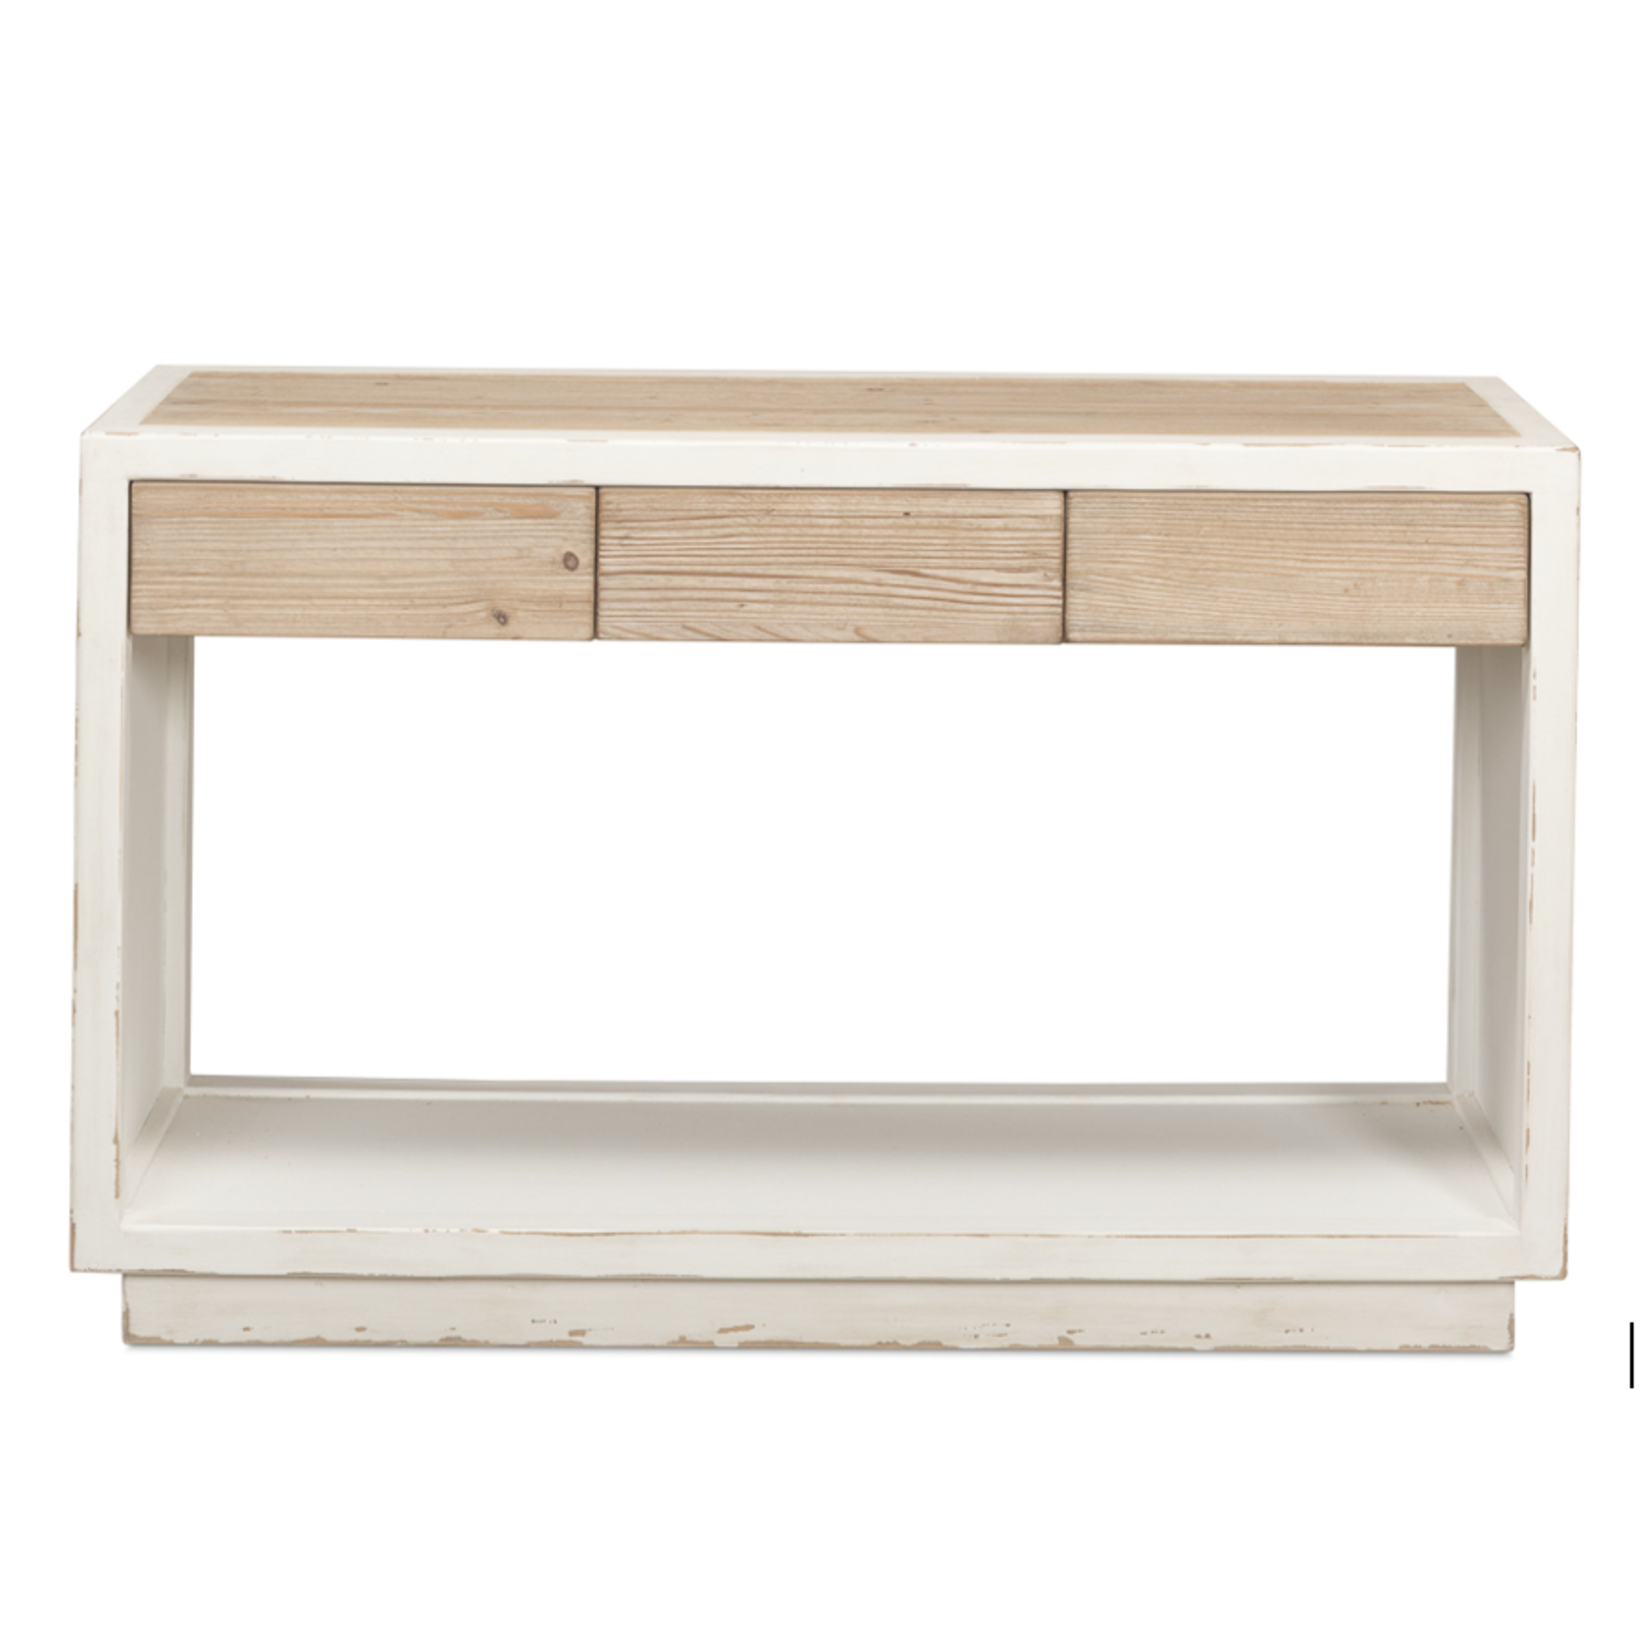 Outside The Box 48x16x30 Connor Antique White Center Drawer Weathered Top Console Table